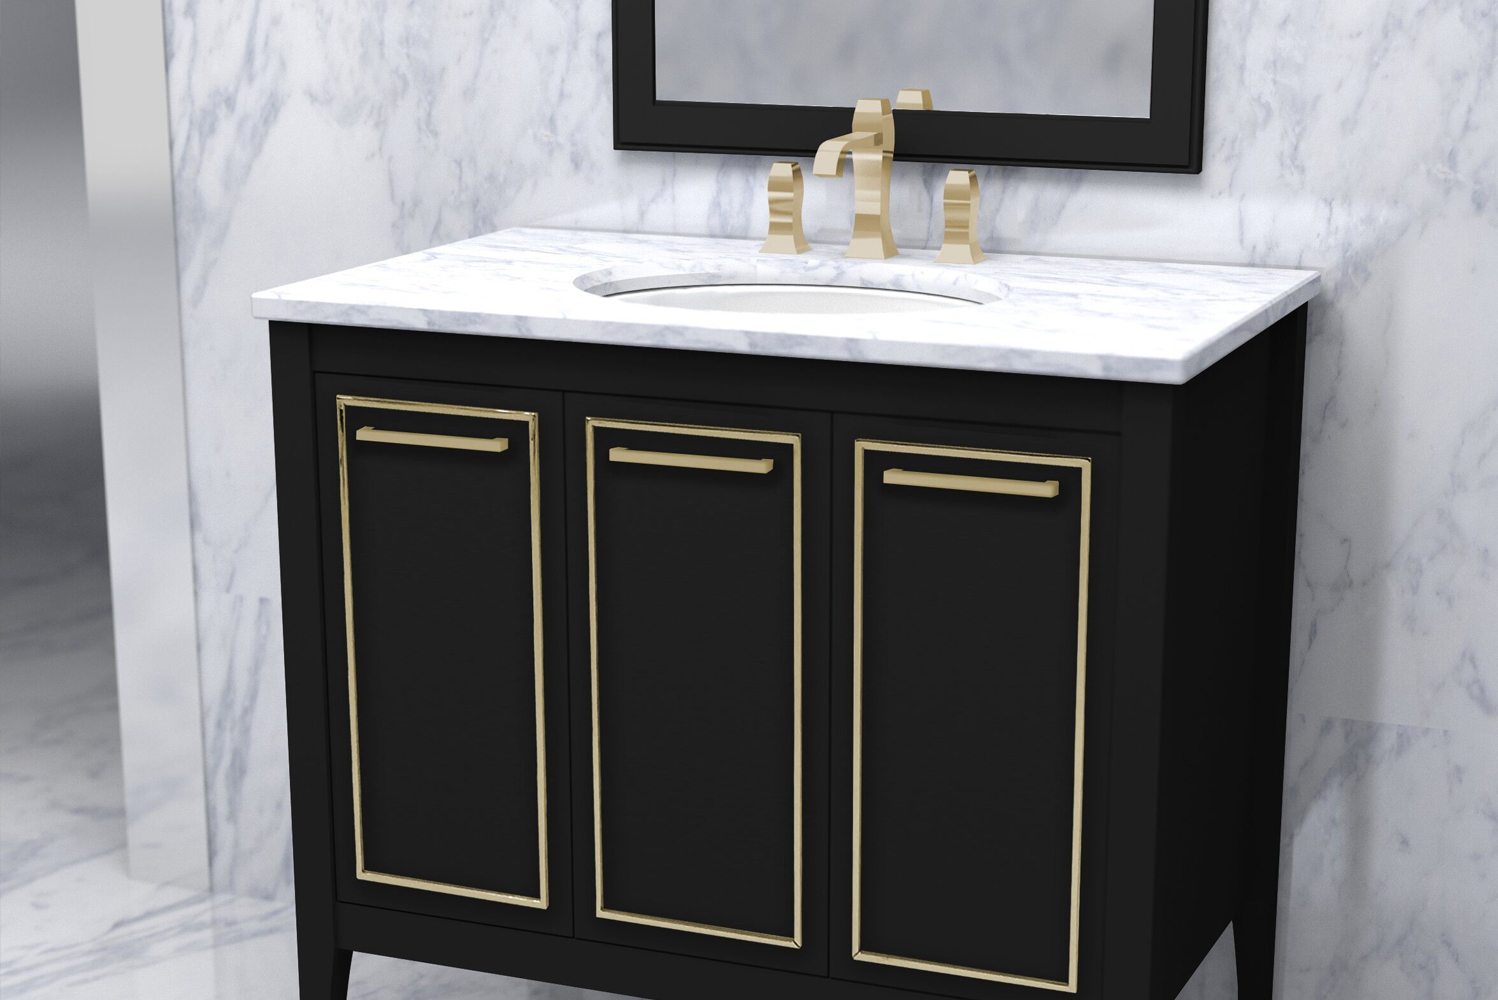 Furniture Guild launched its newest transitional vanity the Lydia 